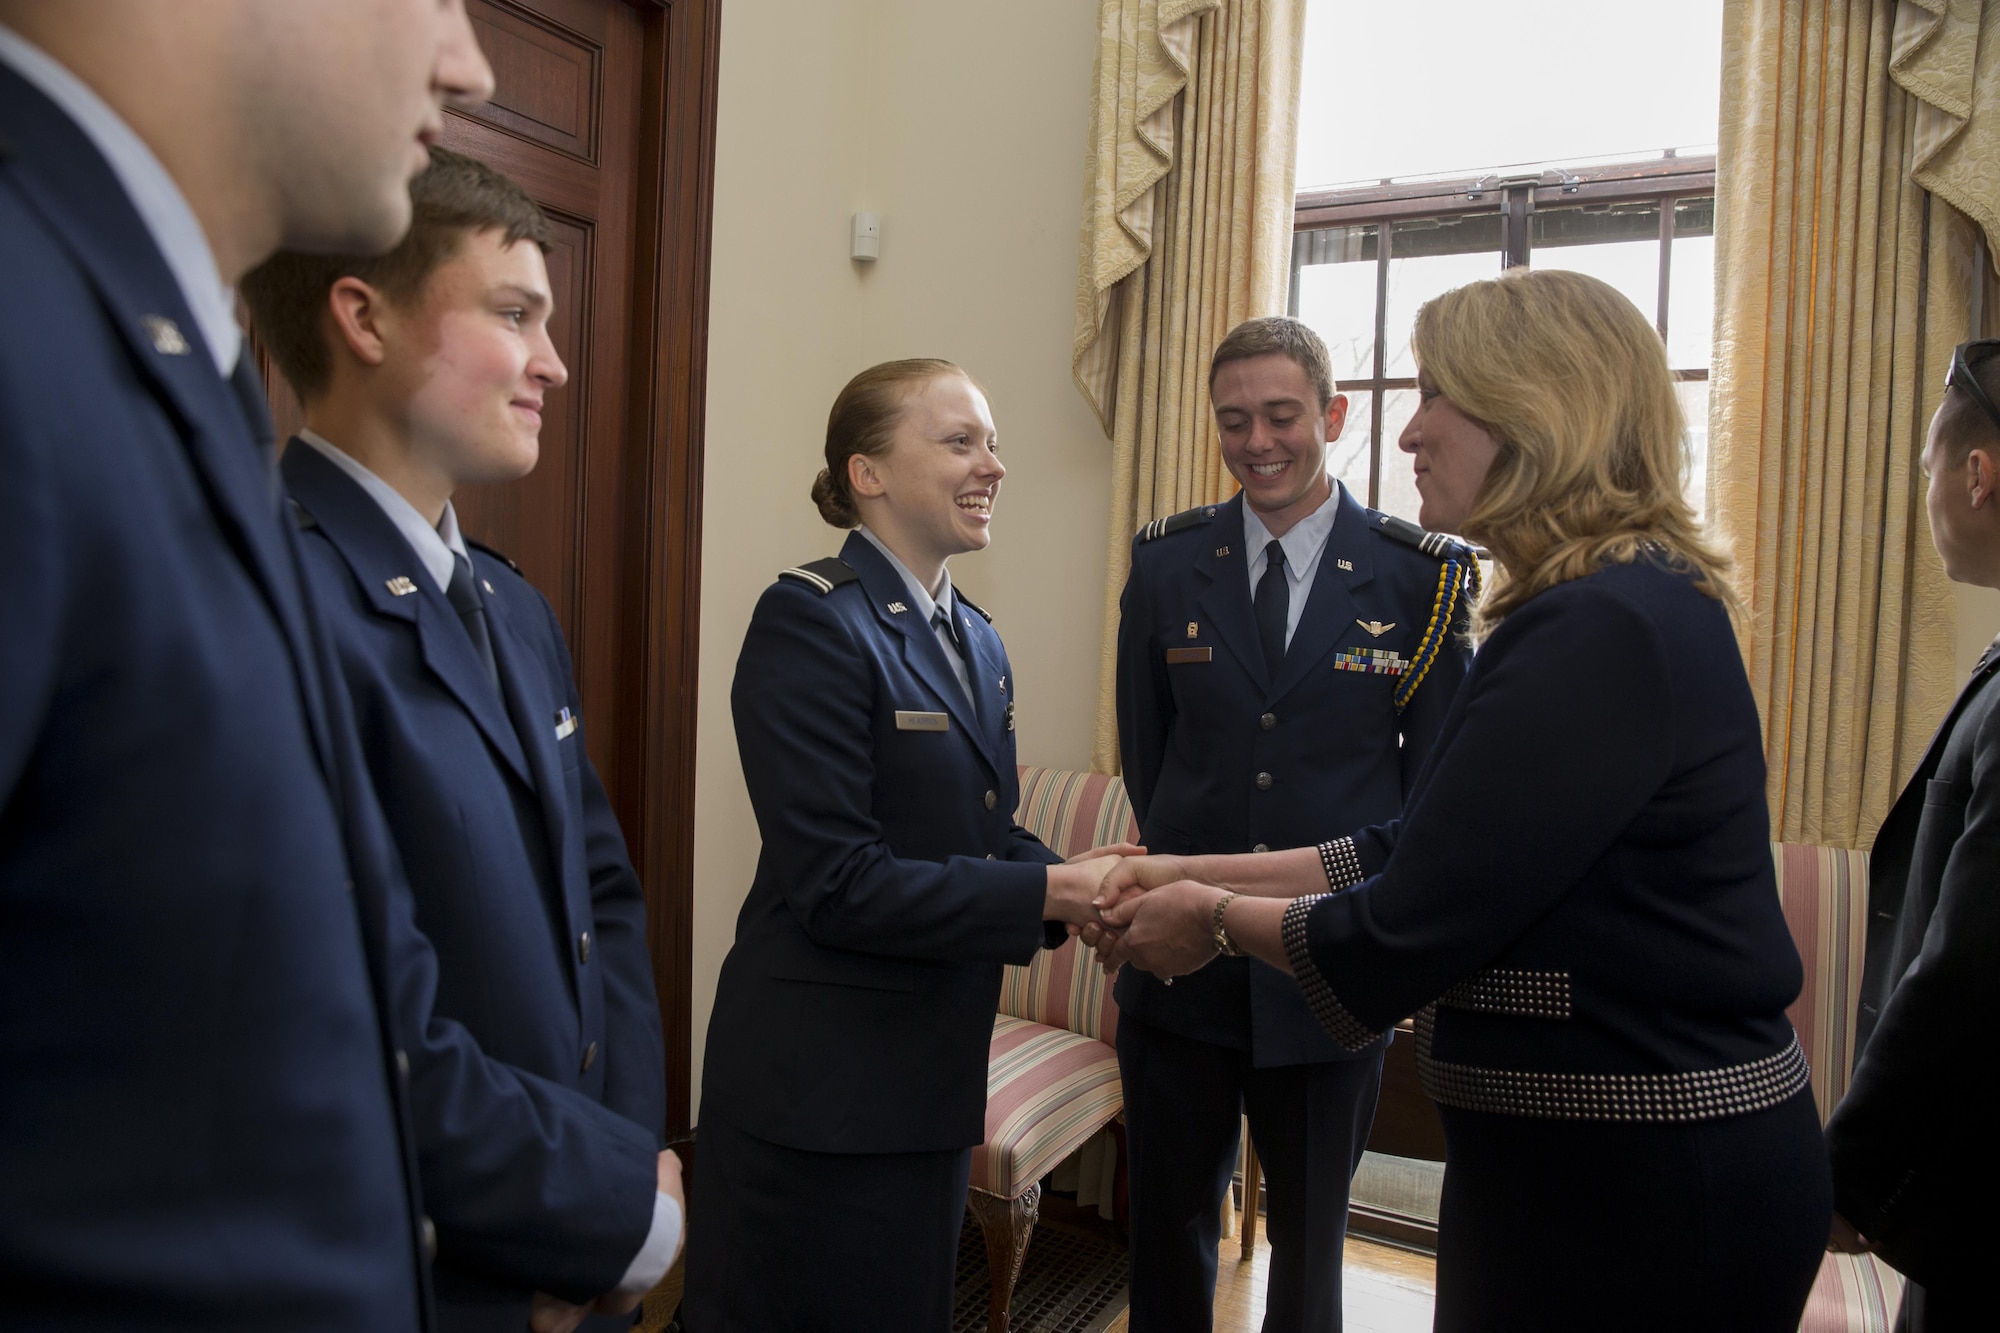 Air Force Secretary Deborah Lee James greets Air Force ROTC cadets at Harvard University in Cambridge, Mass., after signing an agreement officially bringing the program back to the school April 22, 2016. This marks the first time the school has officially recognized the Air Force program since school officials stripped the program of its academic standing in 1971. (Photo courtesy of Harvard/Rose Lincoln) 